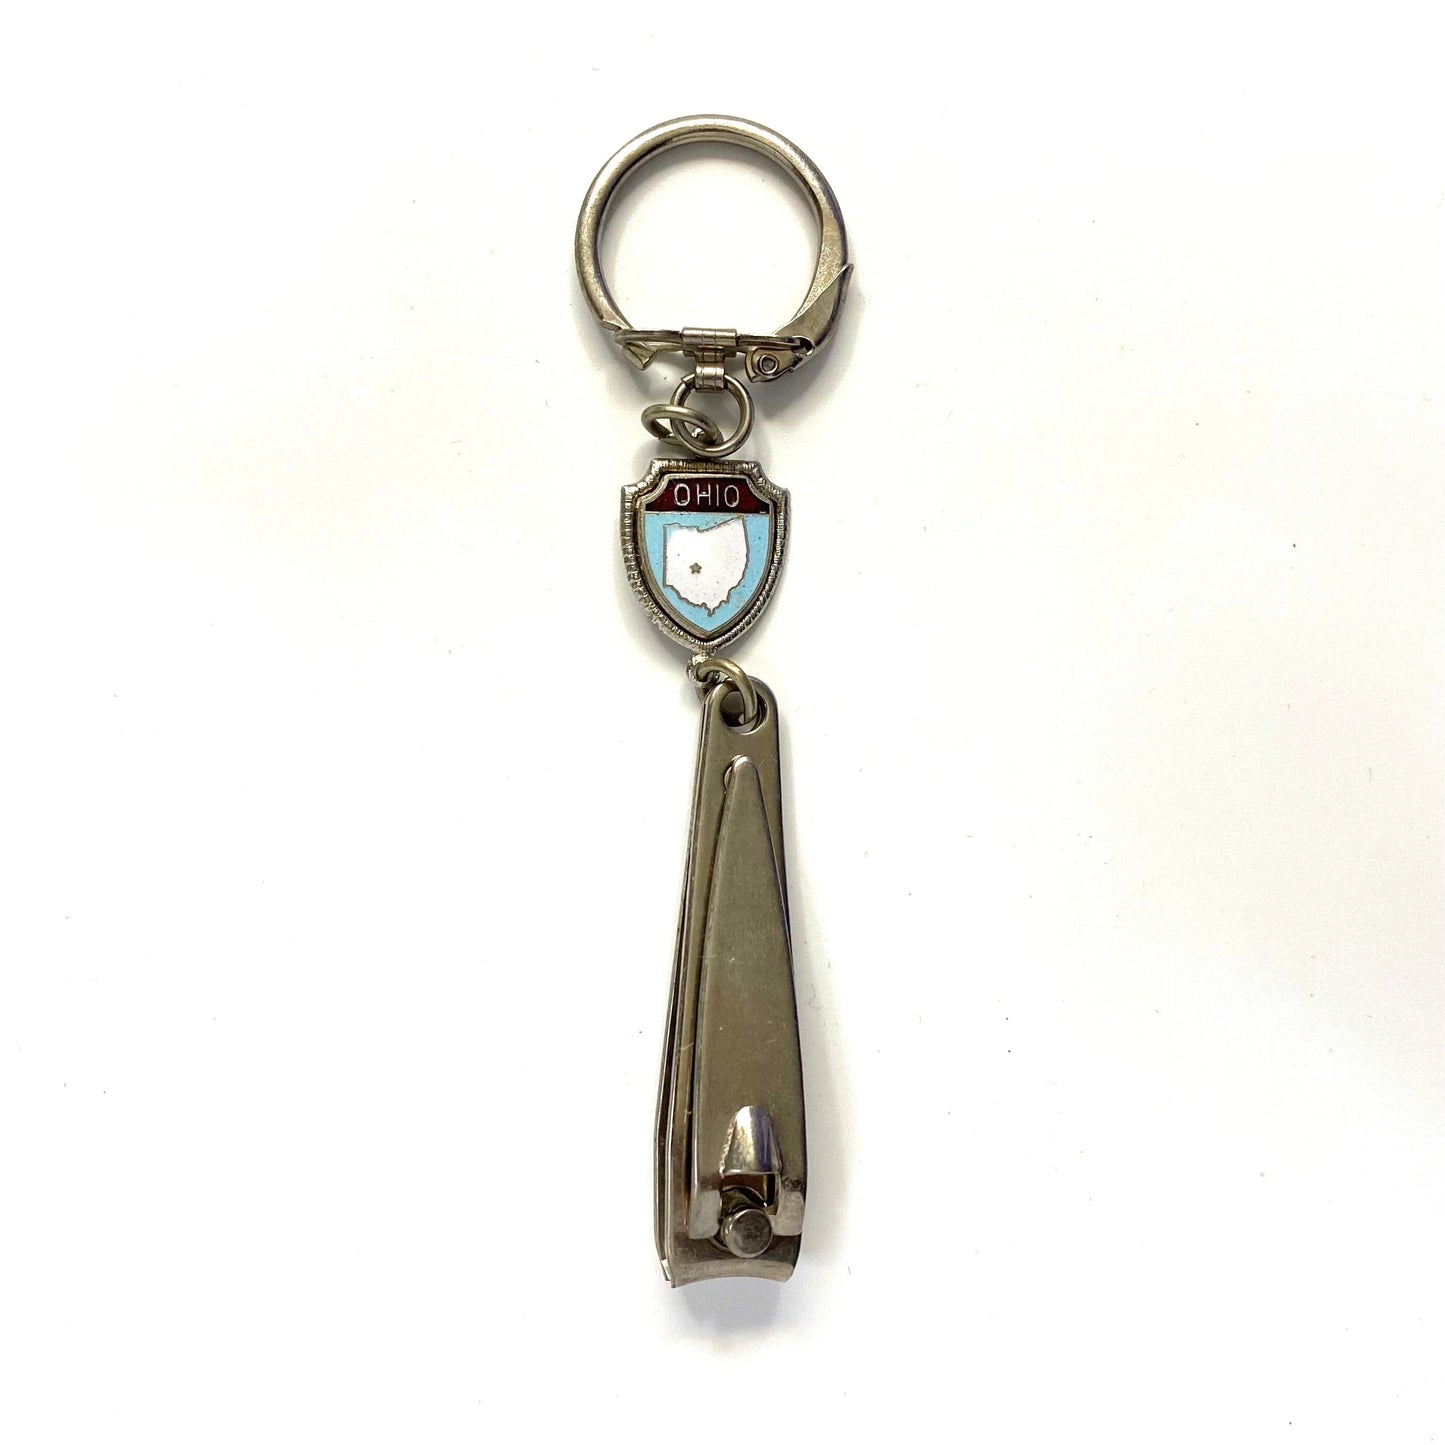 Vintage Ohio Nail Clippers Souvenir Keychain Key Ring Metal Silver